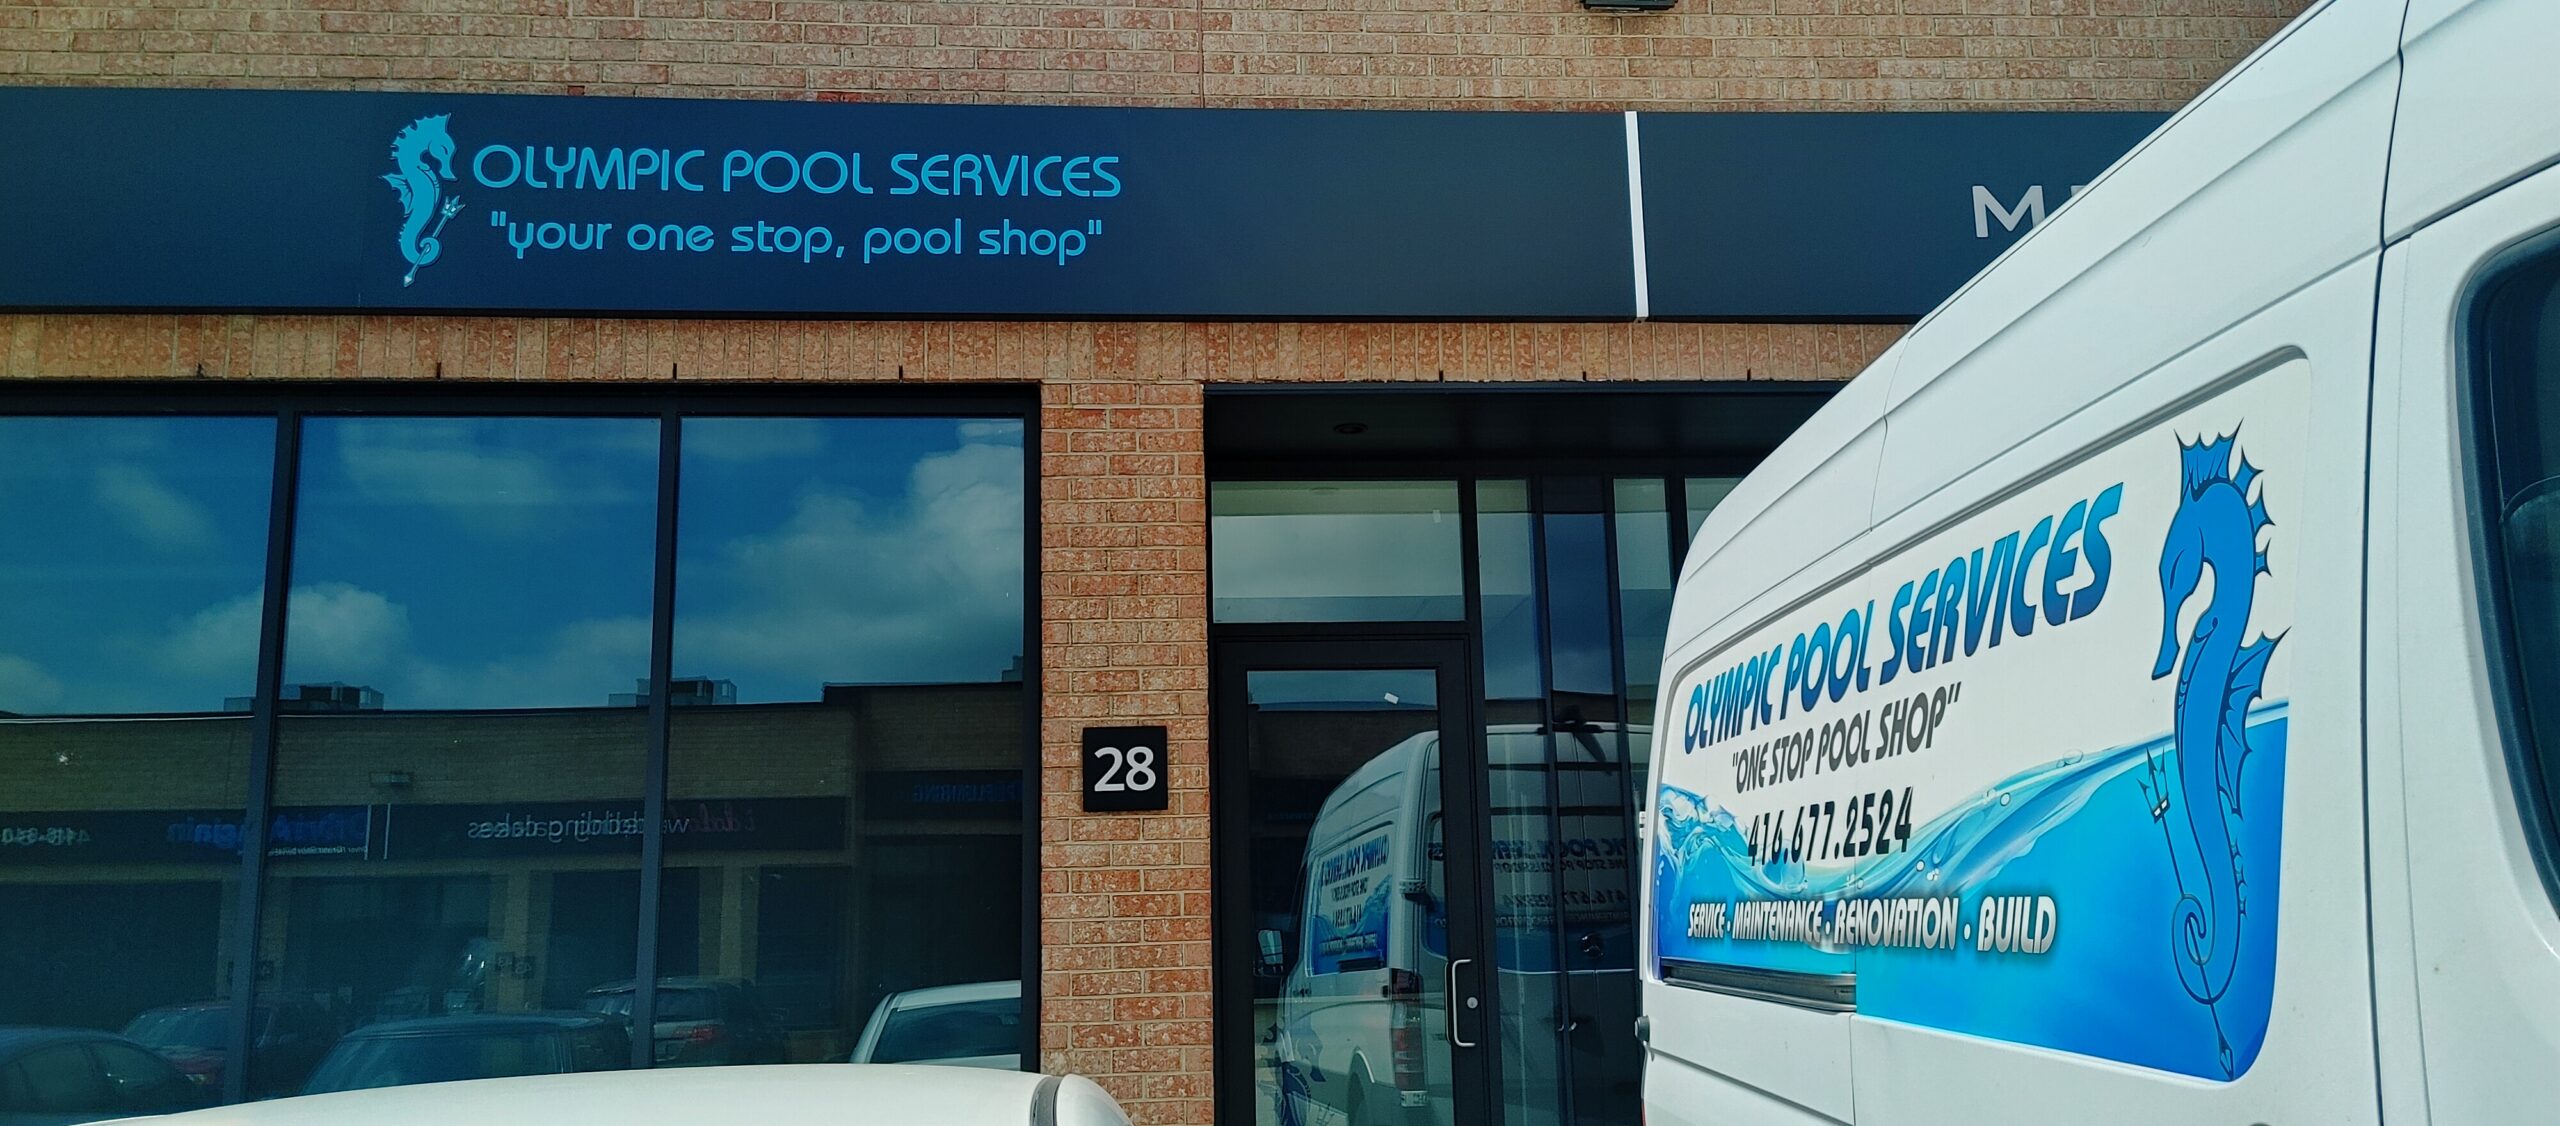 Olympic Pool Services